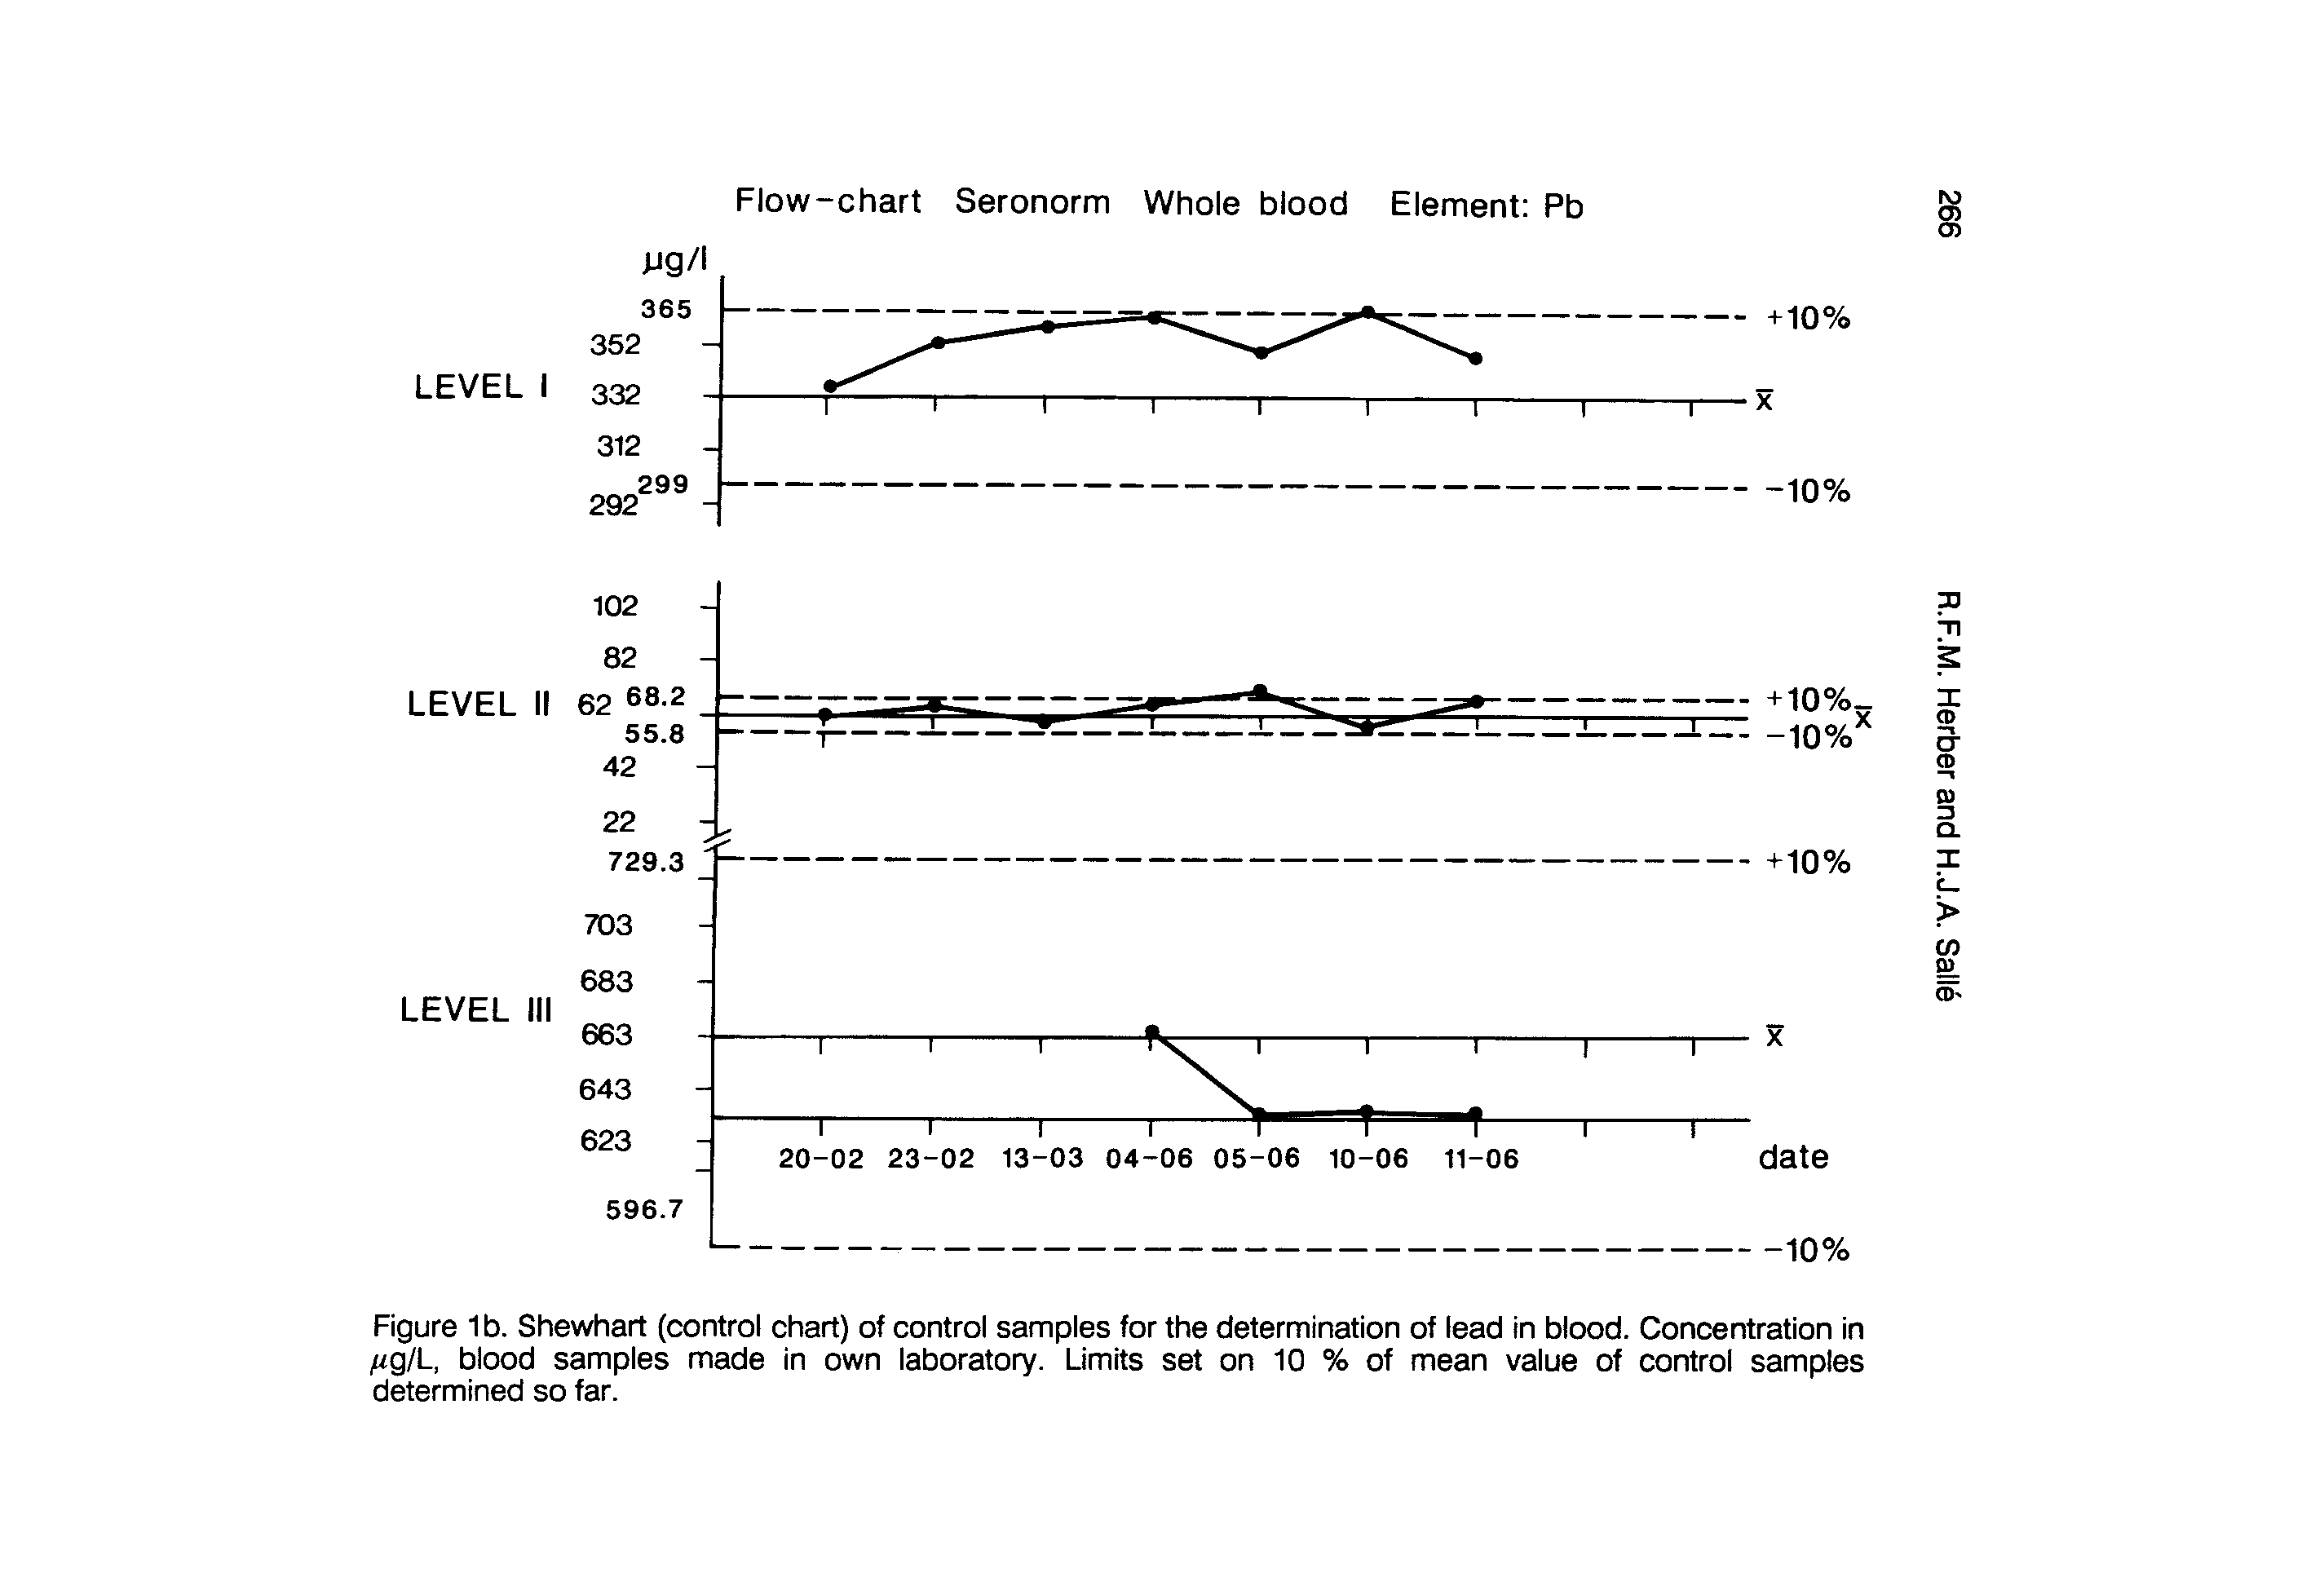 Figure 1b. Shewhart (control chart) of control samples for the determination of lead in blood. Concentration in //g/L, blood samples made in own laboratory. Limits set on 10 % of mean value of control samples determined so far.